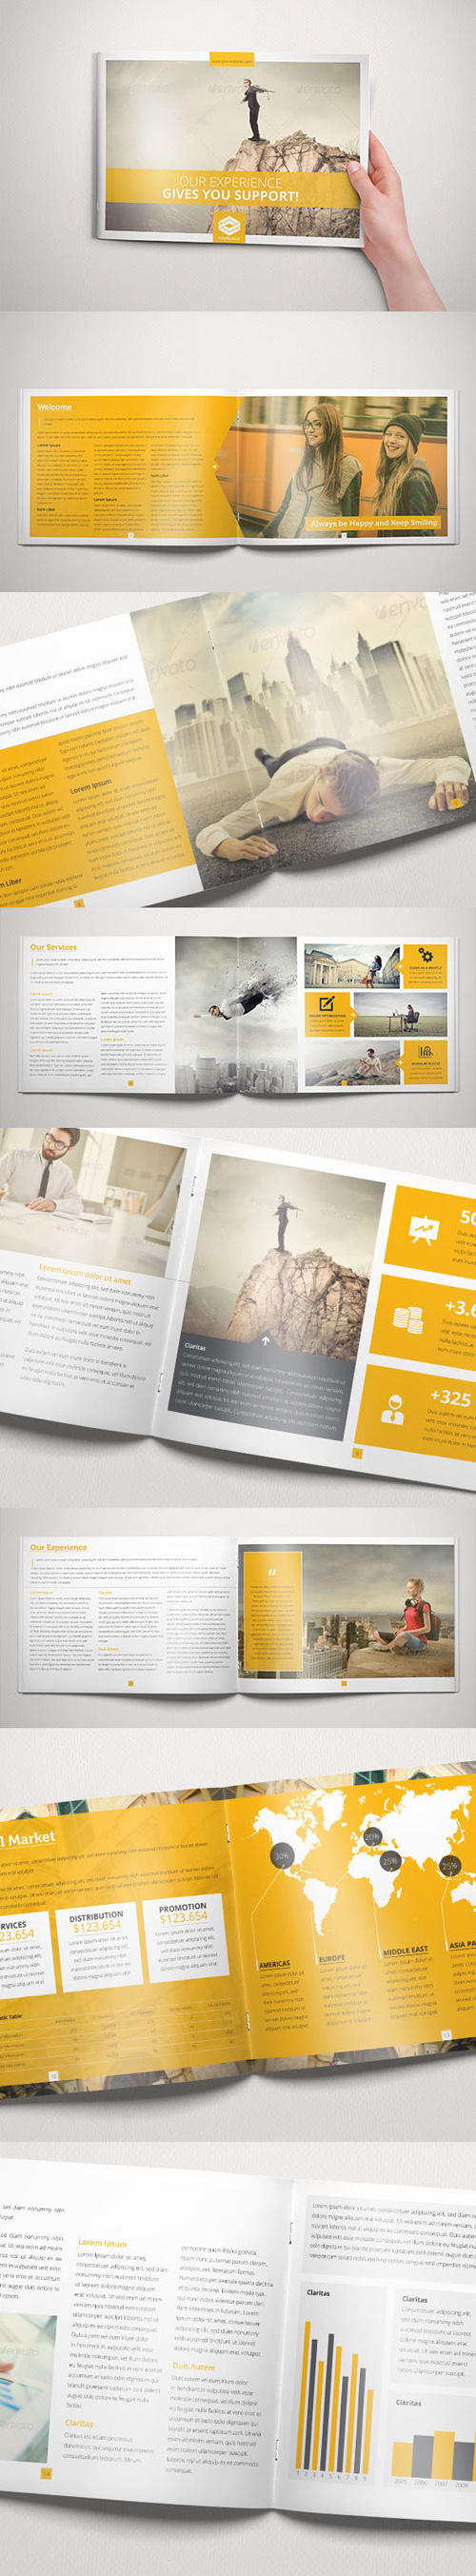 Business Brochure Indesign Template